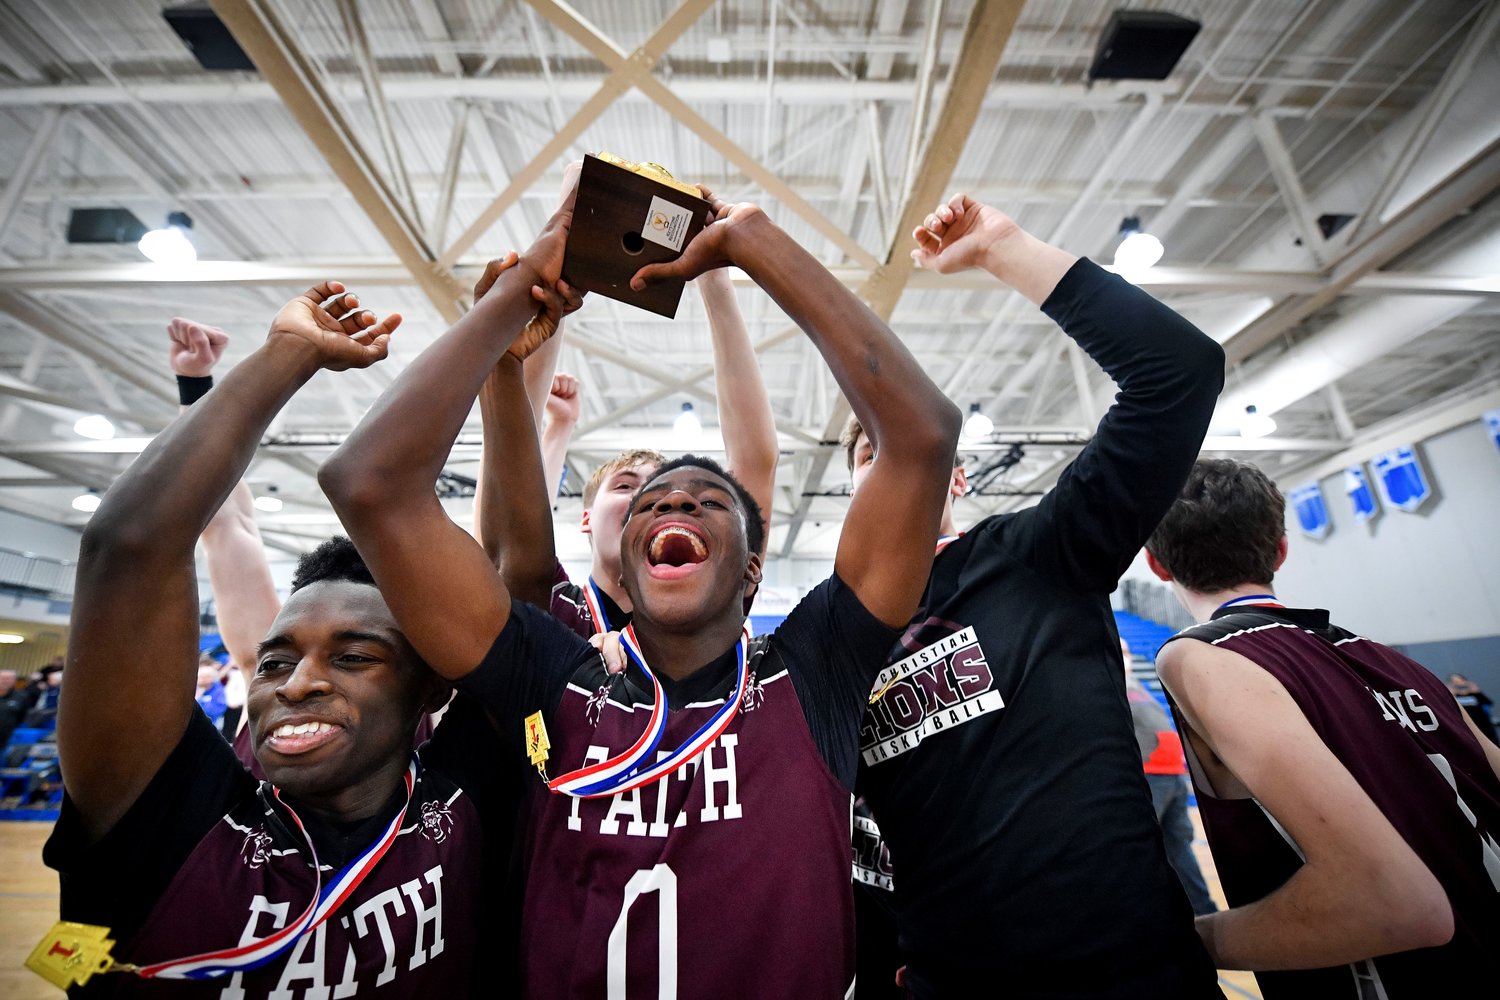 Faith’s Chris Evans, center, leads the celebration after getting the championship trophy.